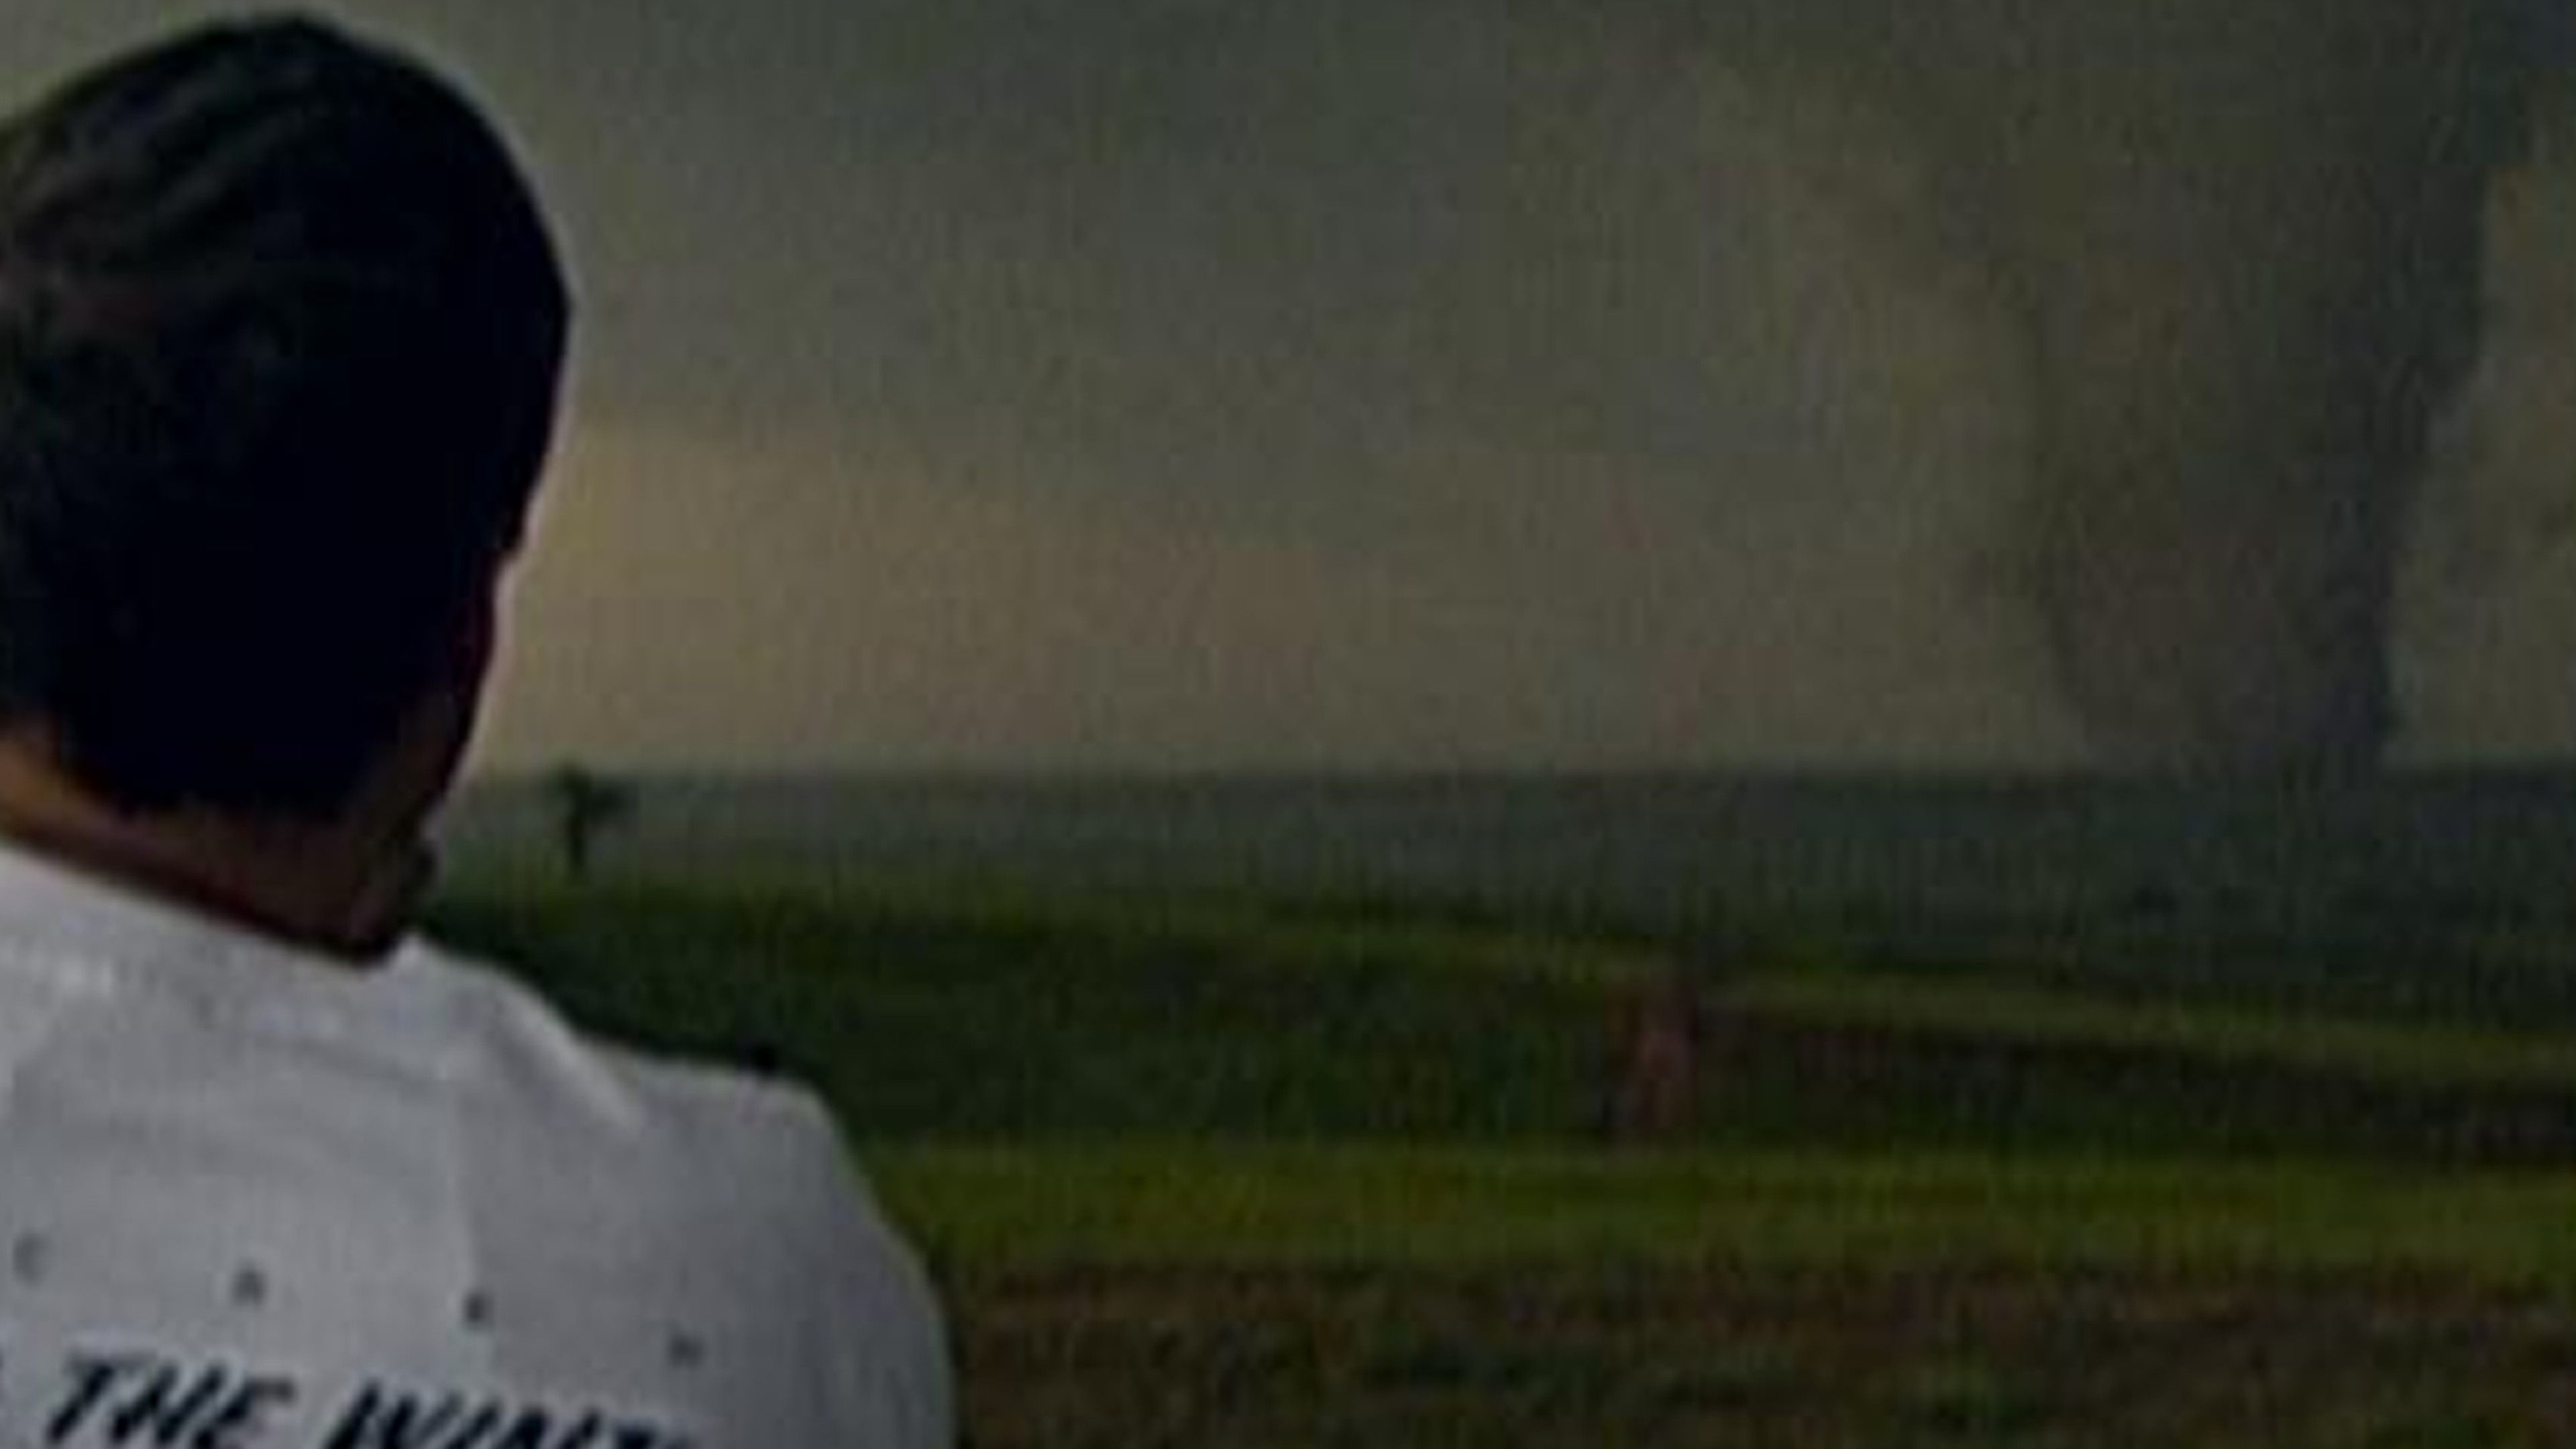 Is Global Warming Producing More Tornadoes?